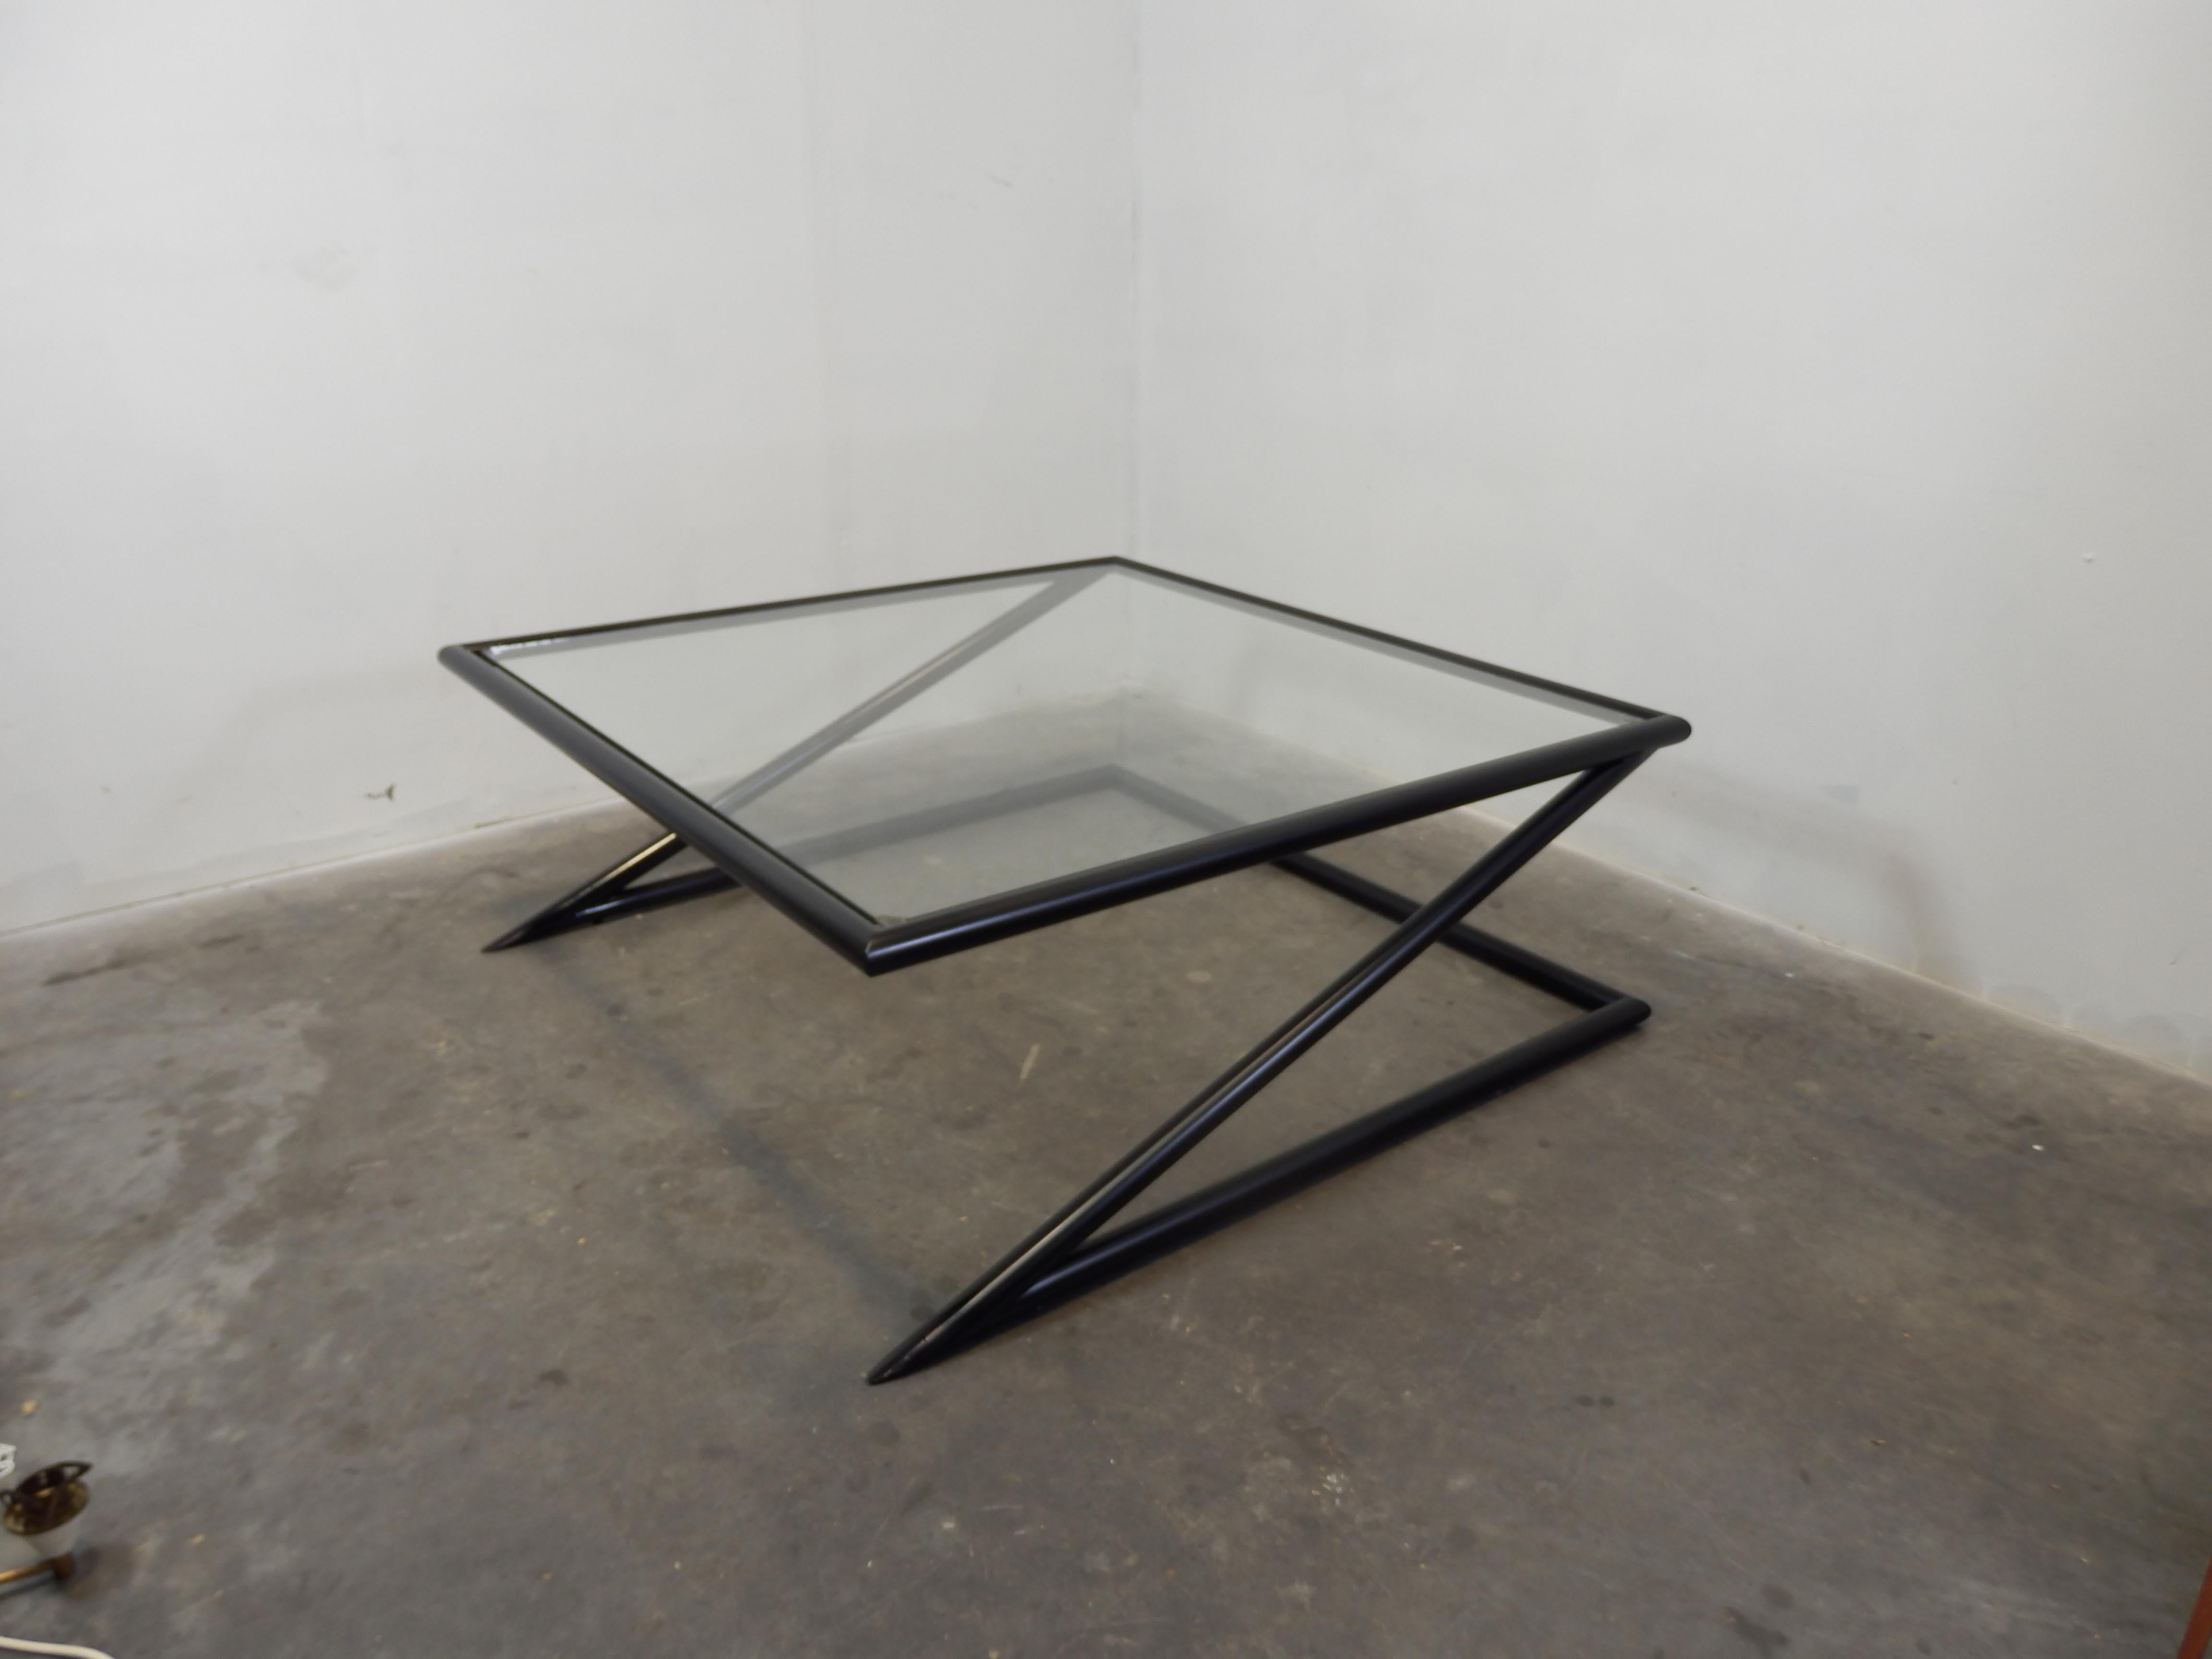 Dutch Design 'Z' table by Harvink, 1980s.
The Harvink 